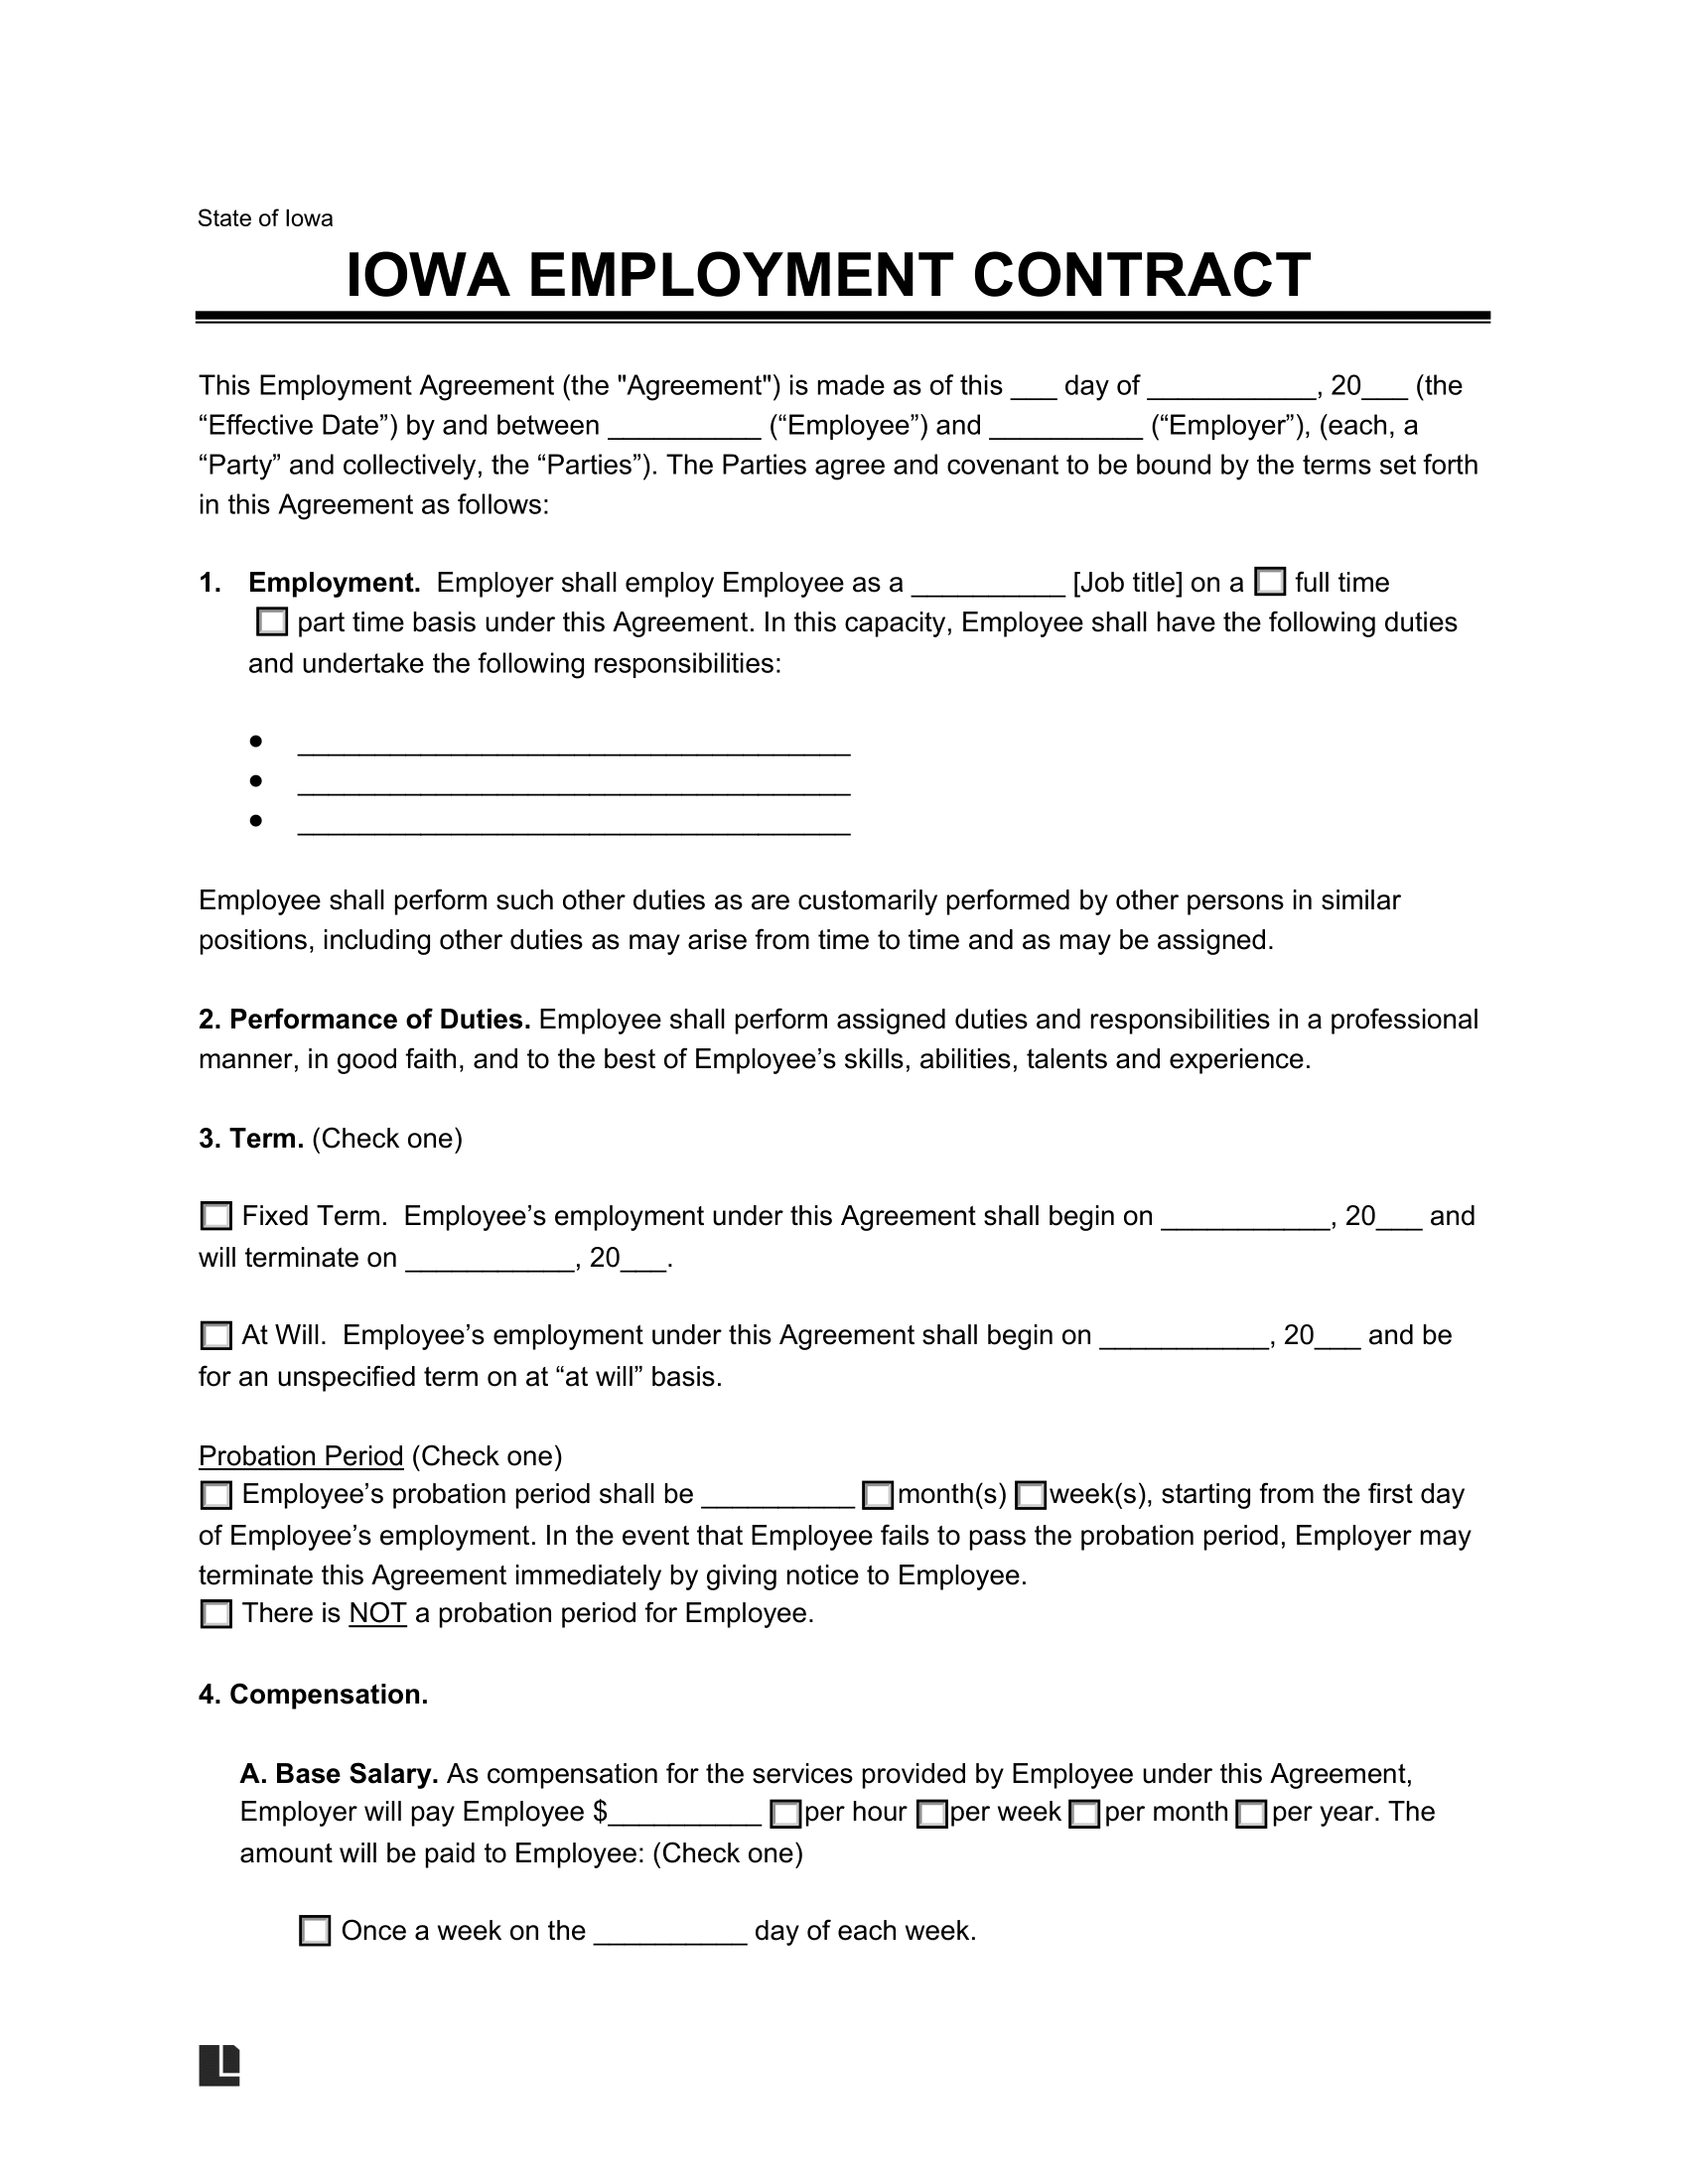 iowa employment contract template